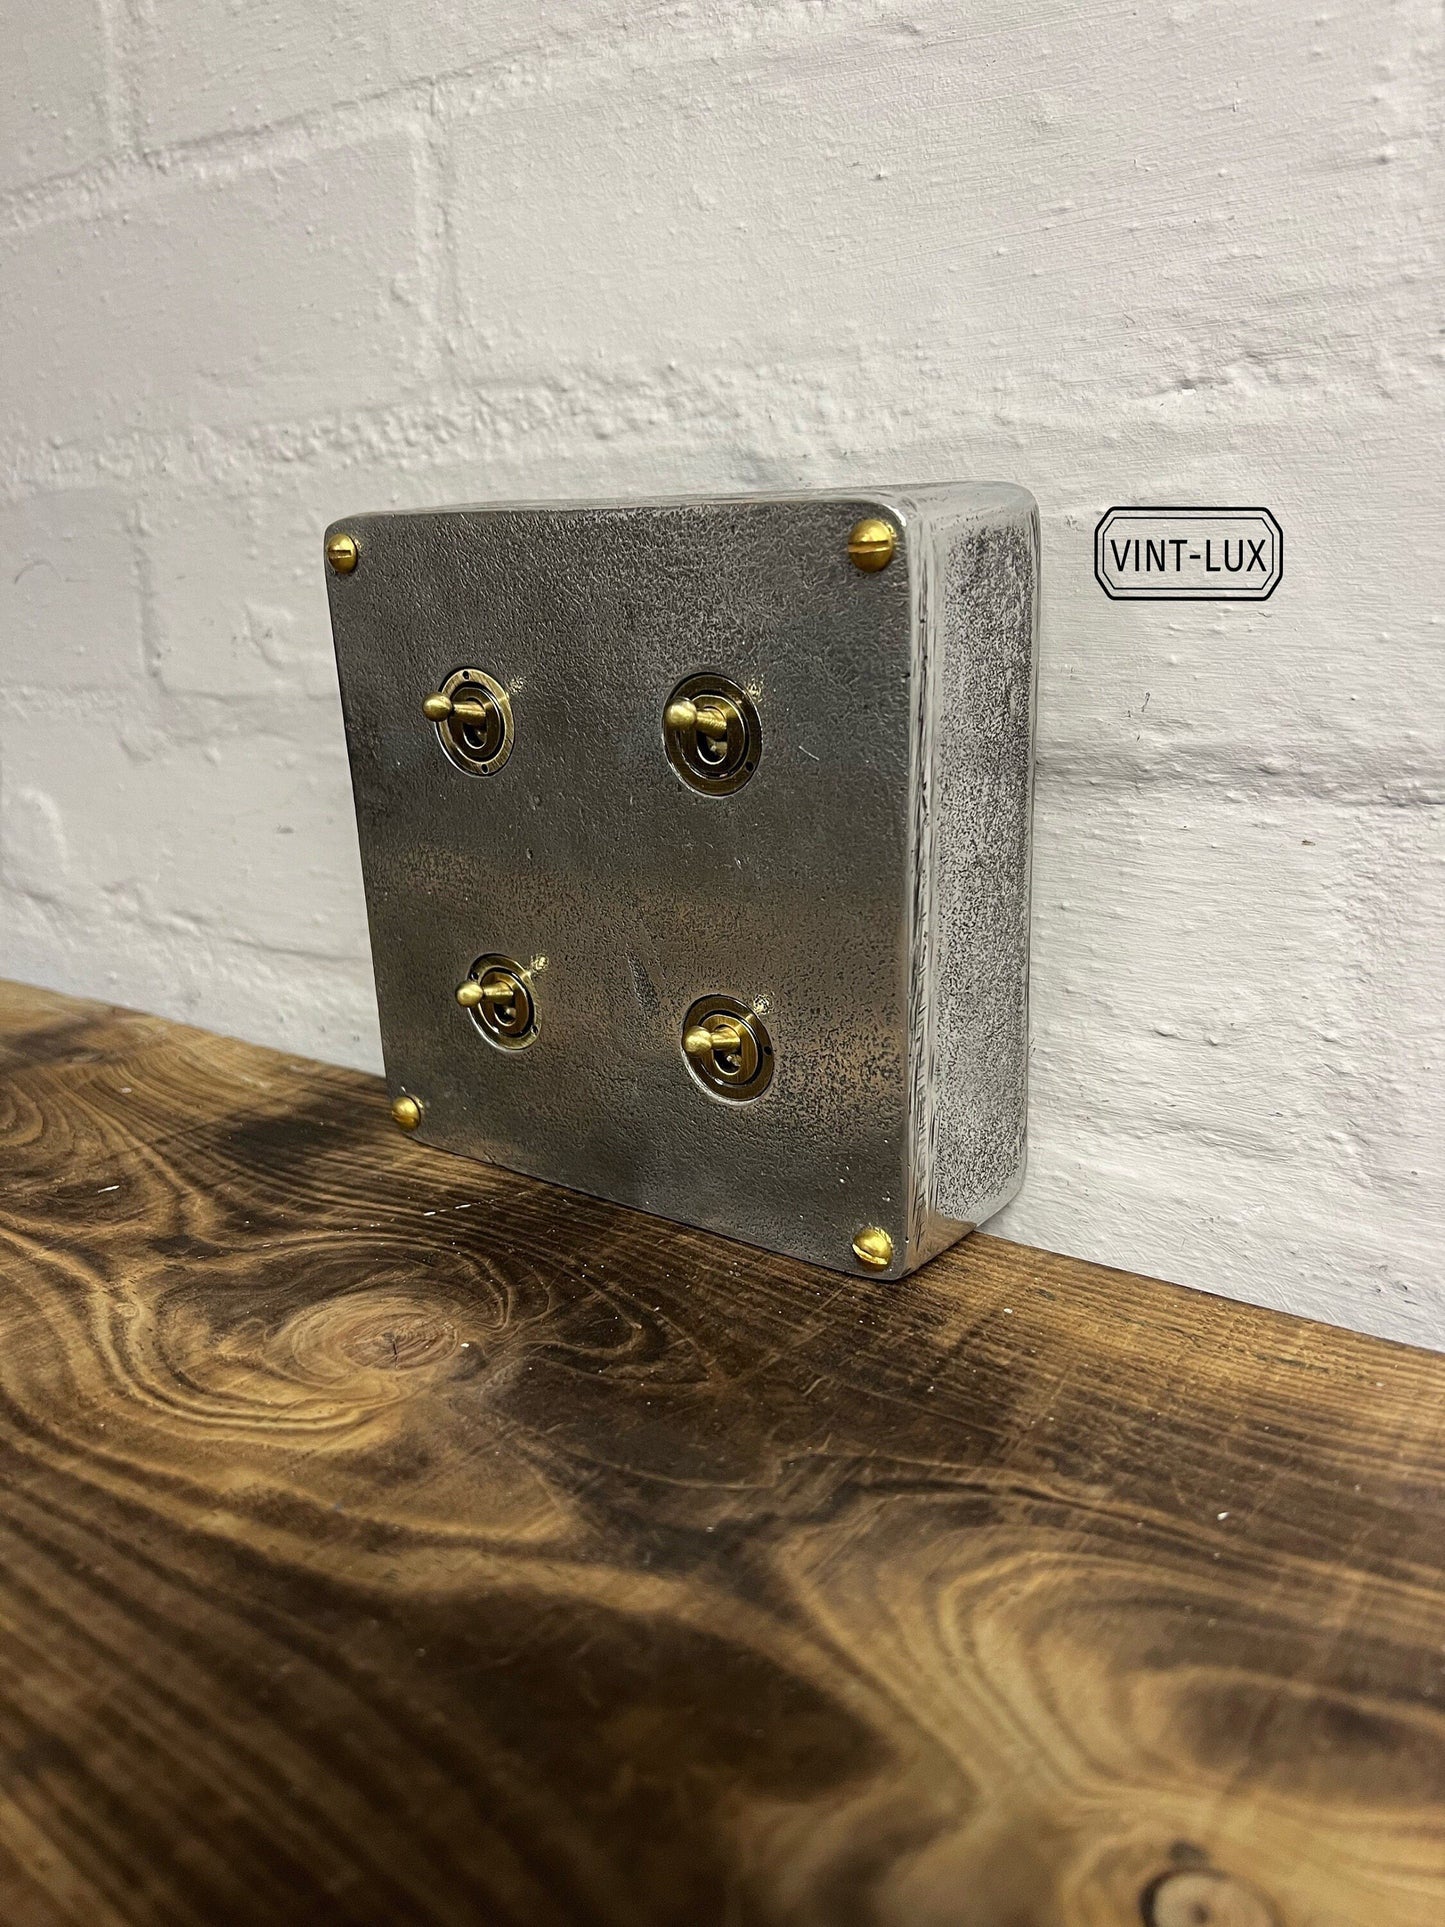 4 Gang 2 Way Solid Cast Metal Conduit Light Switch Industrial - BS EN Approved Vintage Crabtree 1950’s Style